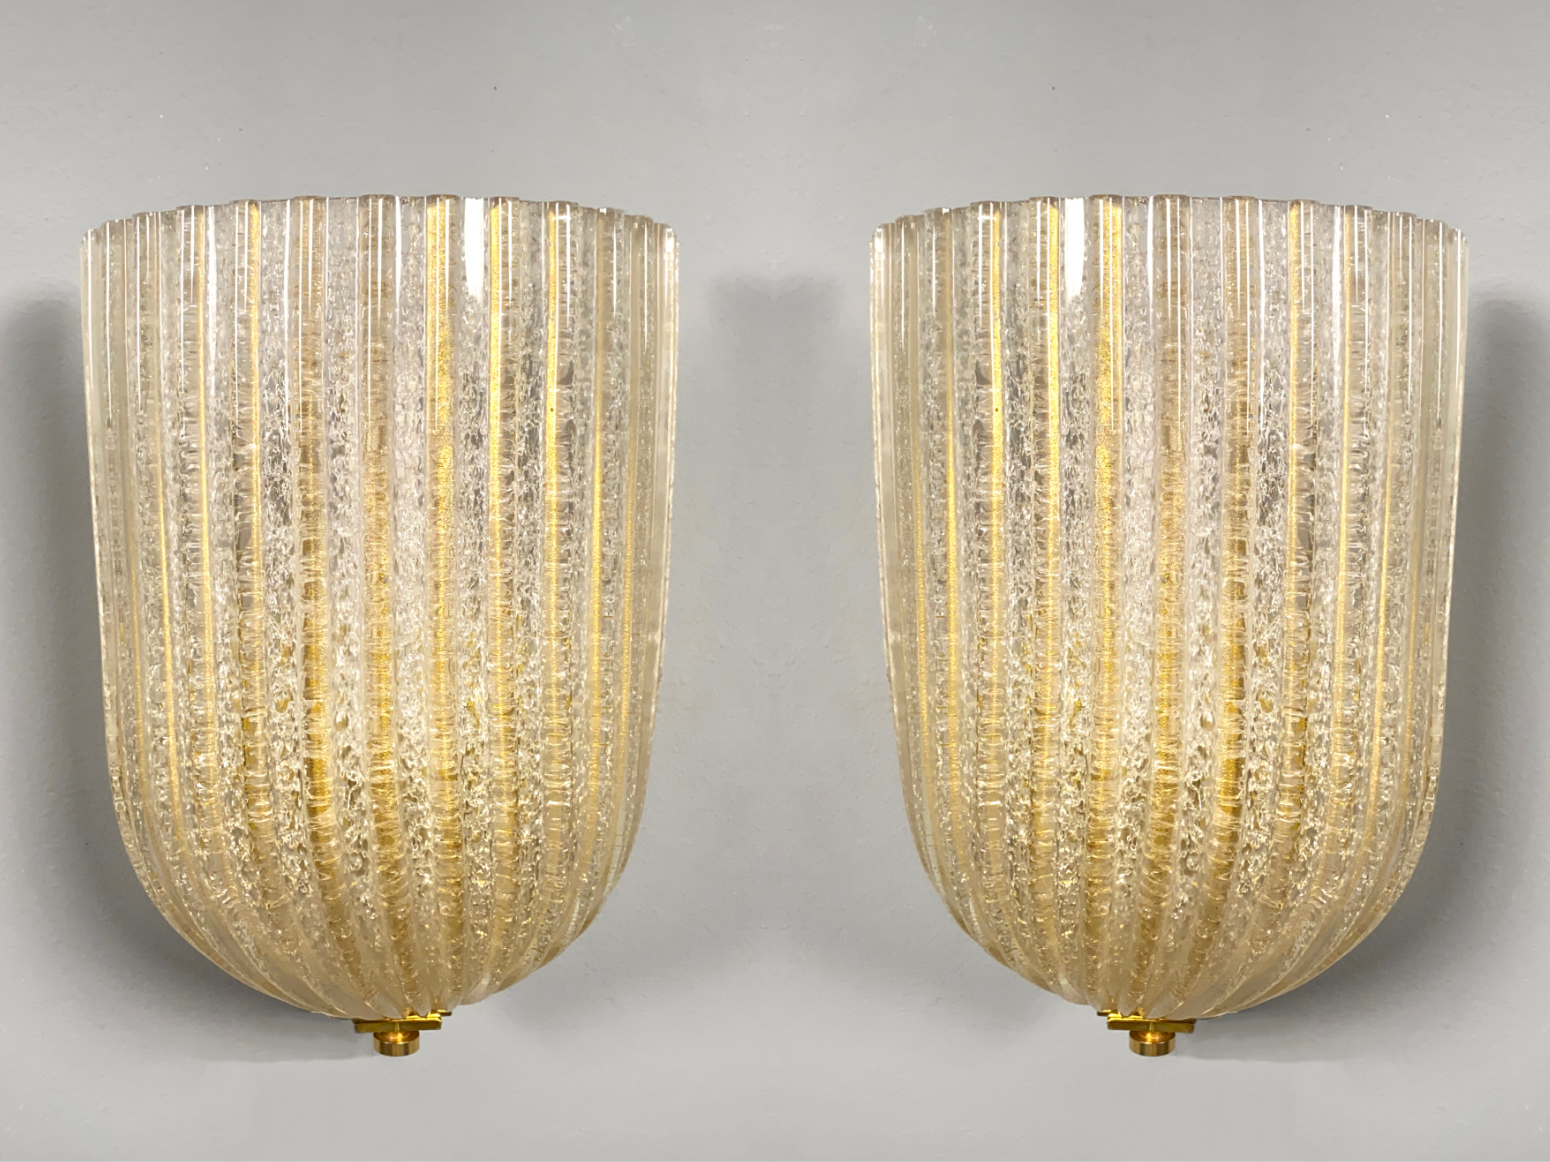 Pair of Sconces by Barovier & Toso, Murano, Italy, 1970s